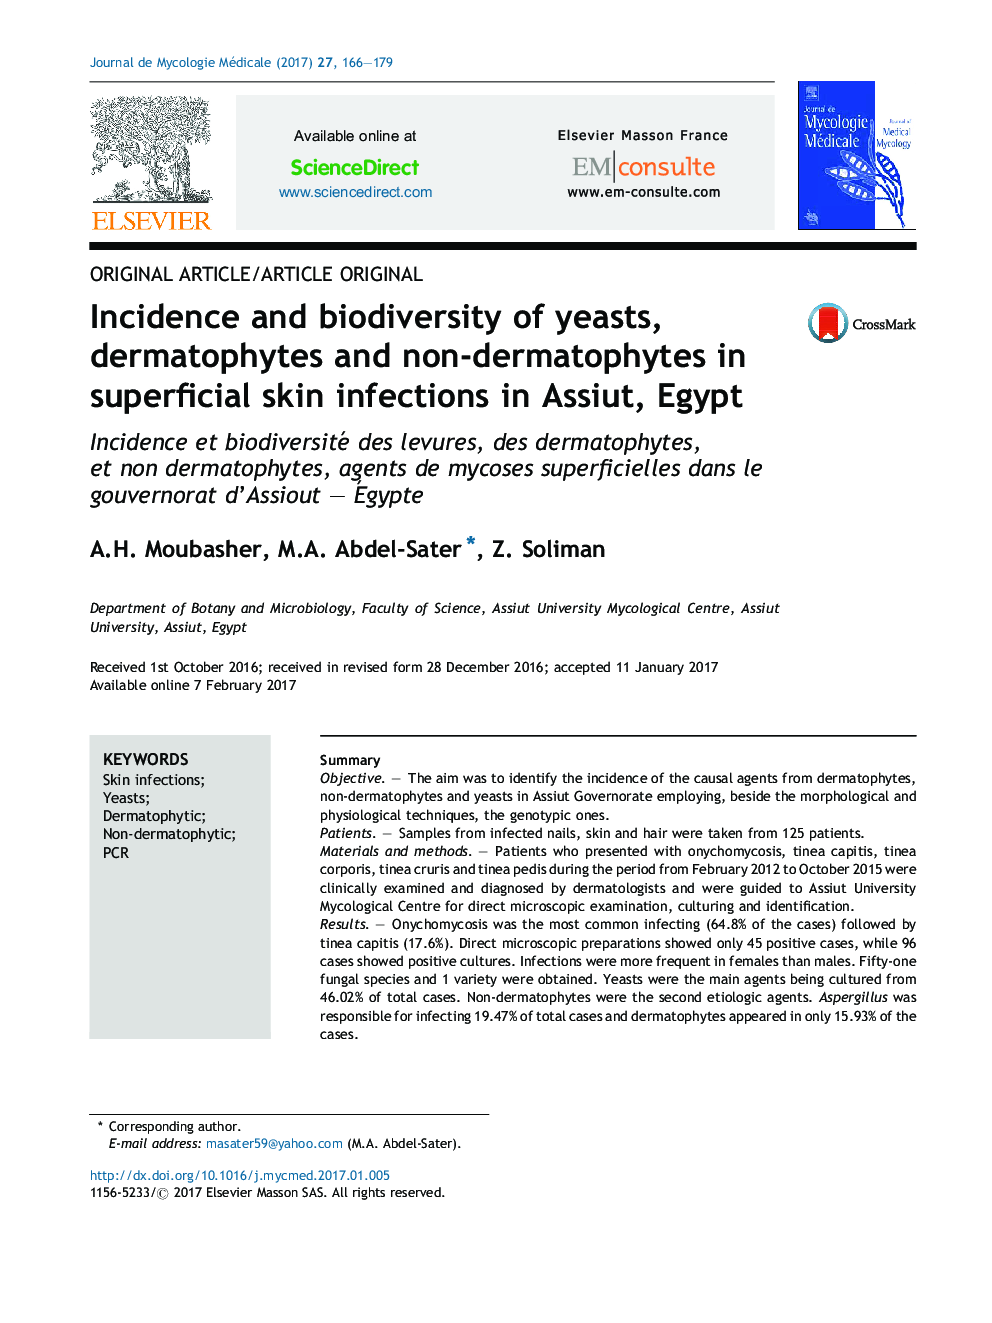 Incidence and biodiversity of yeasts, dermatophytes and non-dermatophytes in superficial skin infections in Assiut, Egypt